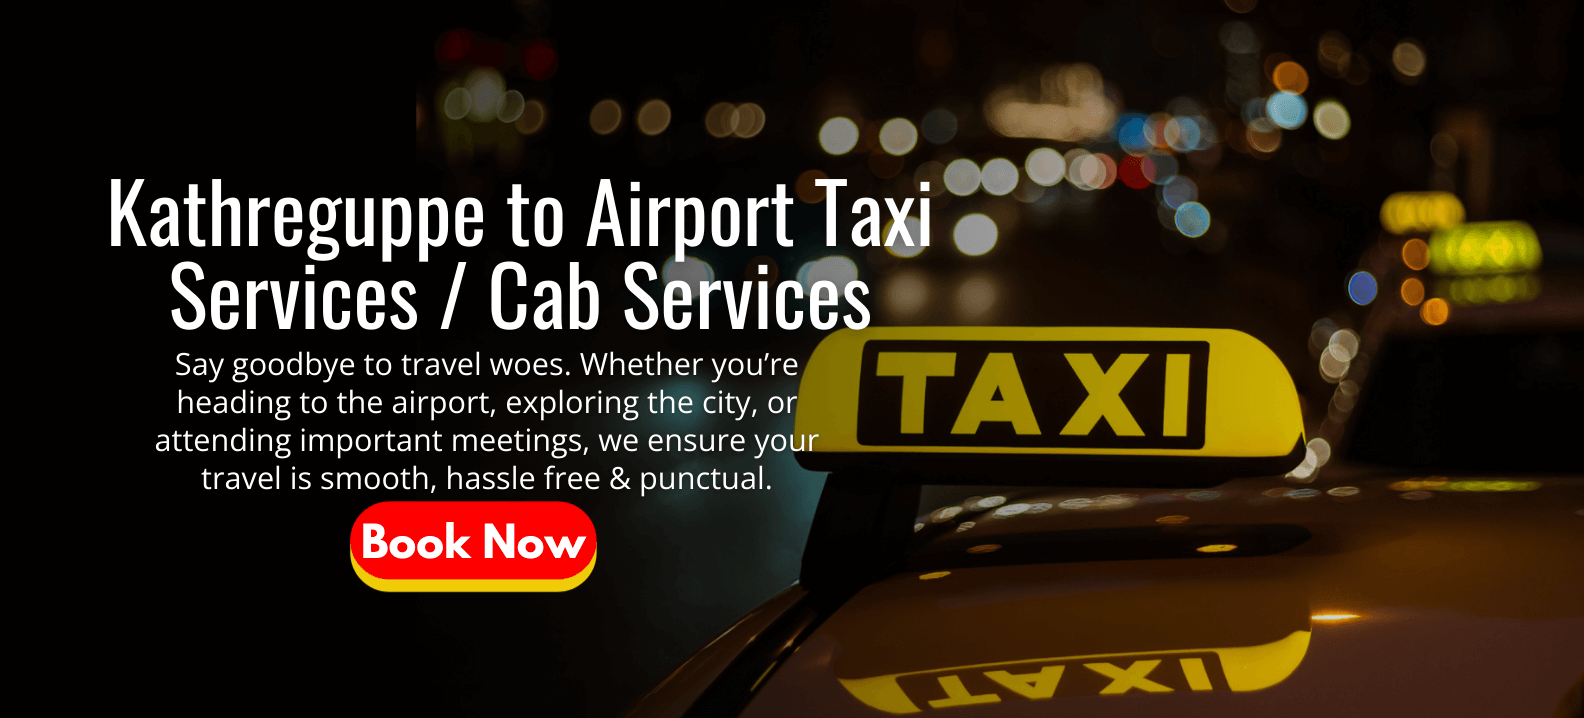 Kathreguppe to Airport Taxi Services _ Cab Services